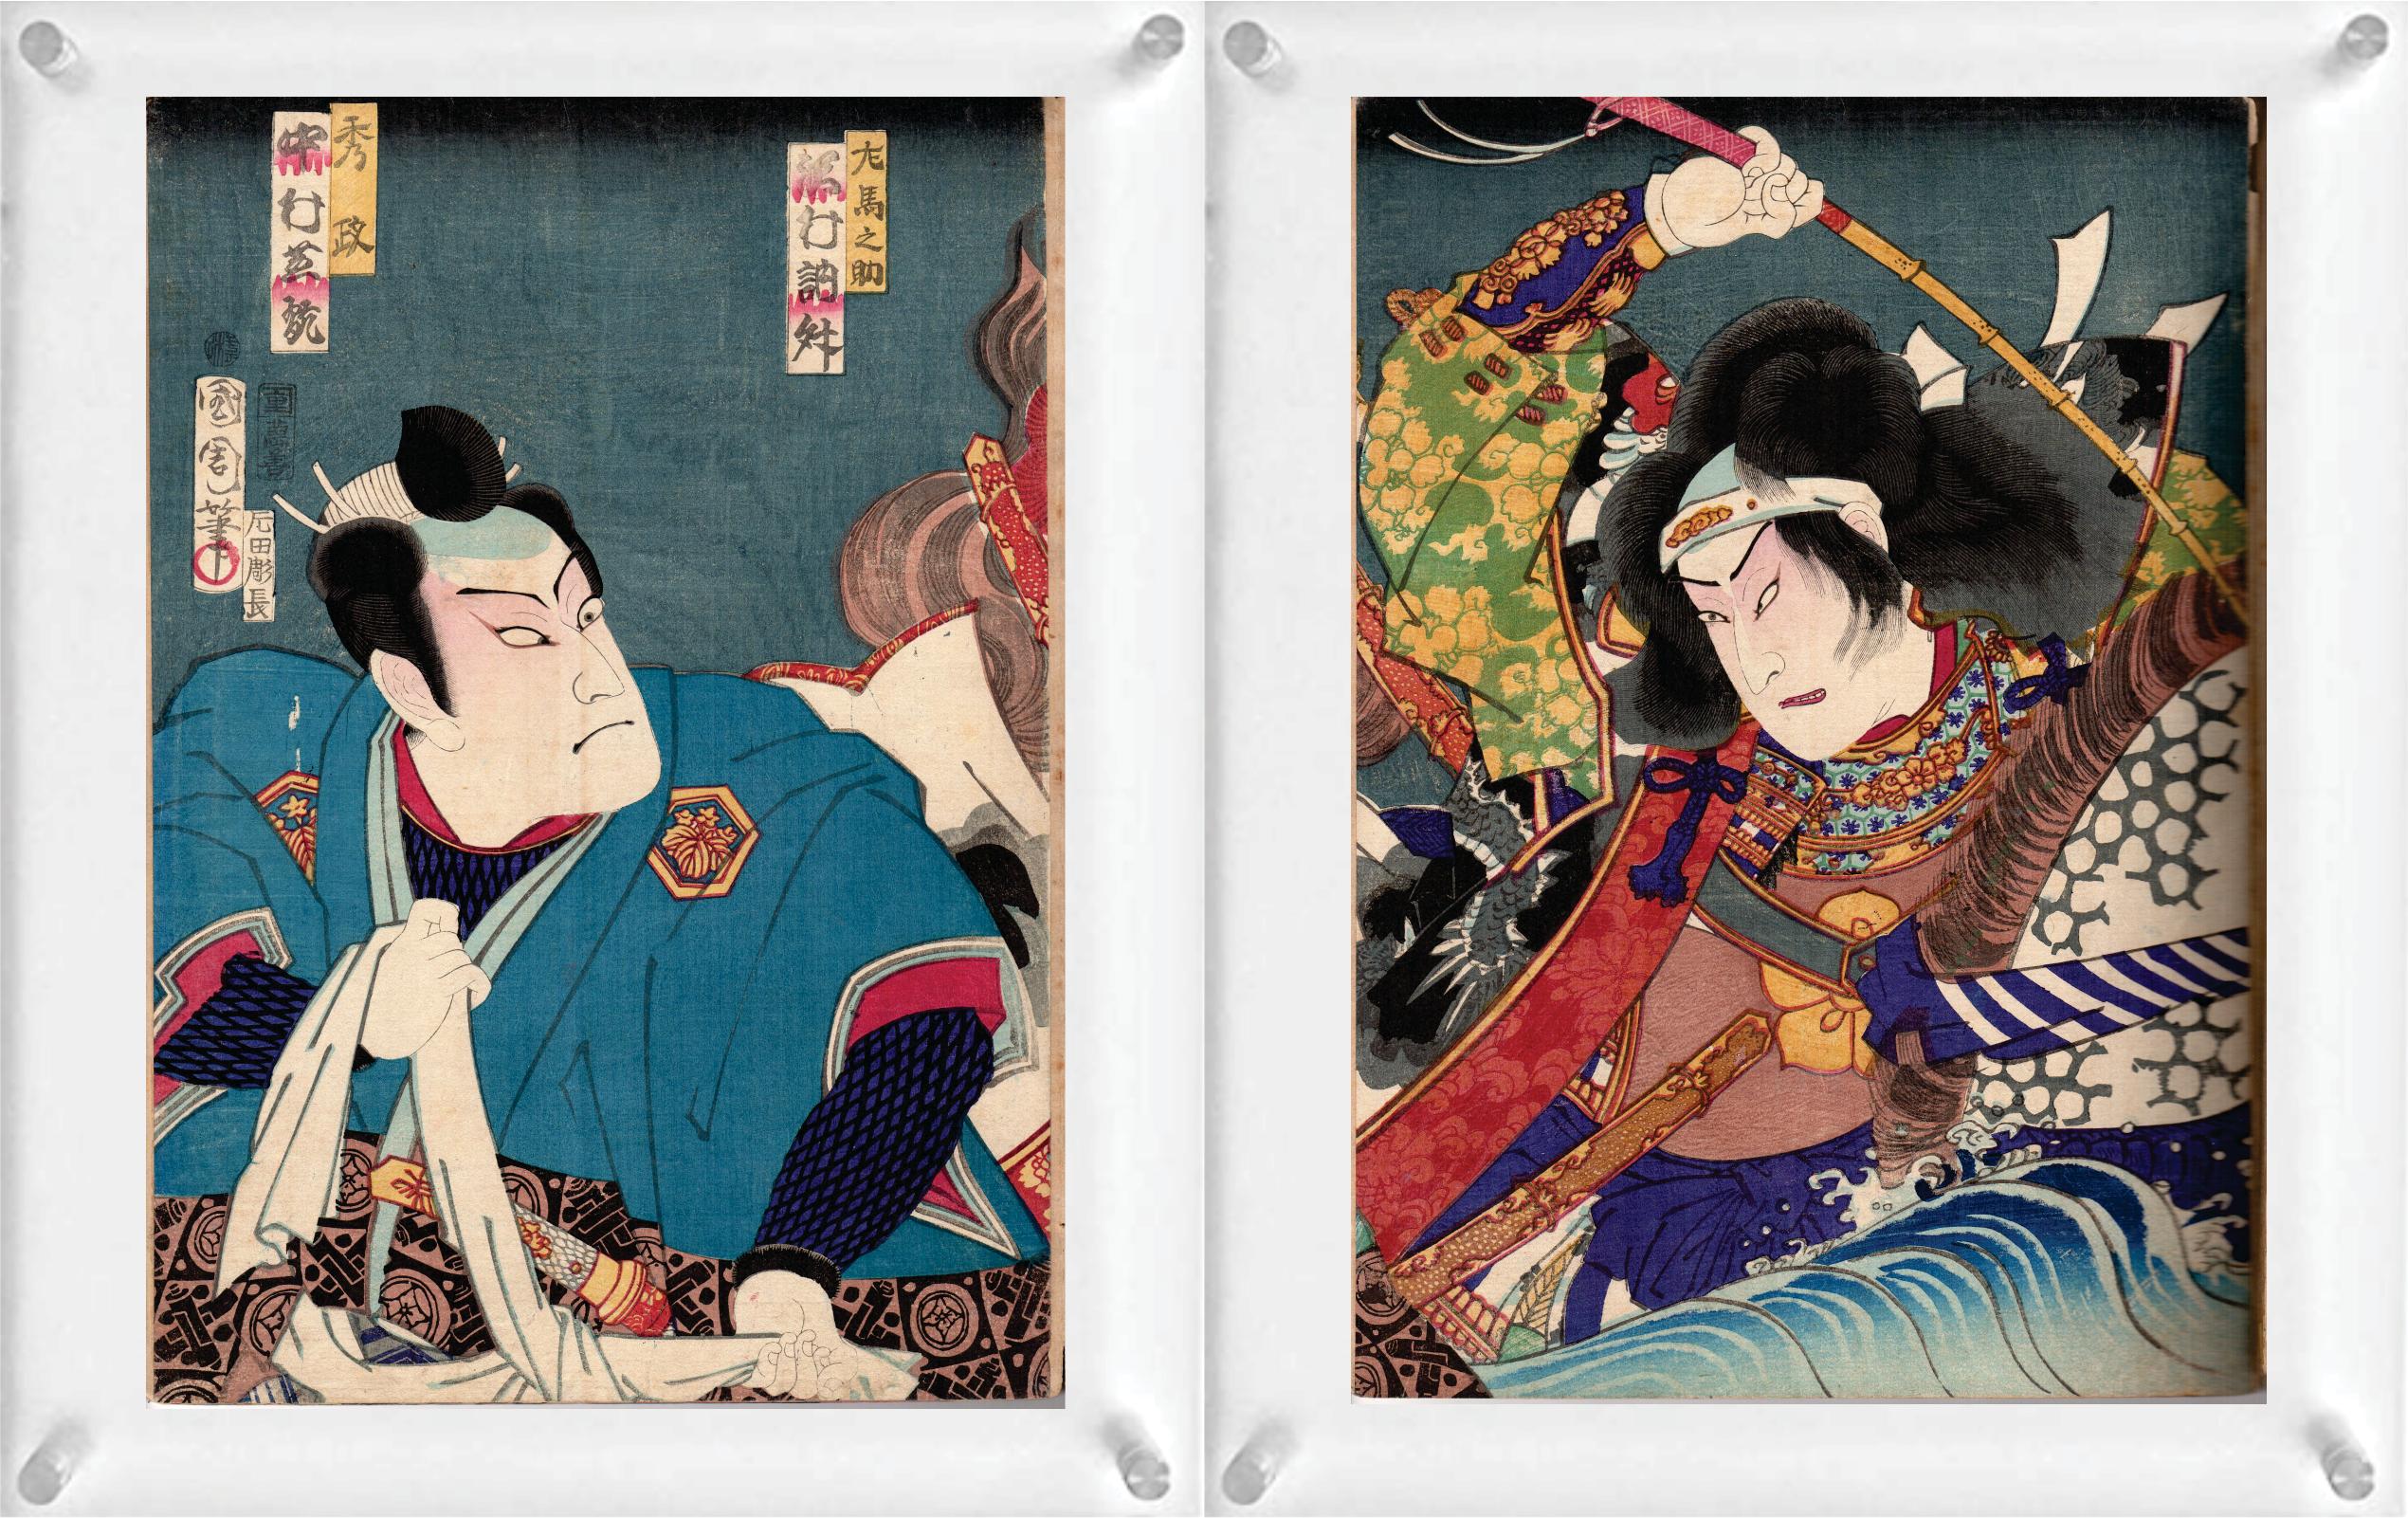 Four Japanese Woodblock Prints (Double-Side) by Toyohara Kunichika (Diptych), and Shosai Ikkei - from Thirty-Six Comics of the Famous Places of Tokyo.

Note: These are only two pieces of woodblock prints with 4 images. They are double-sided with